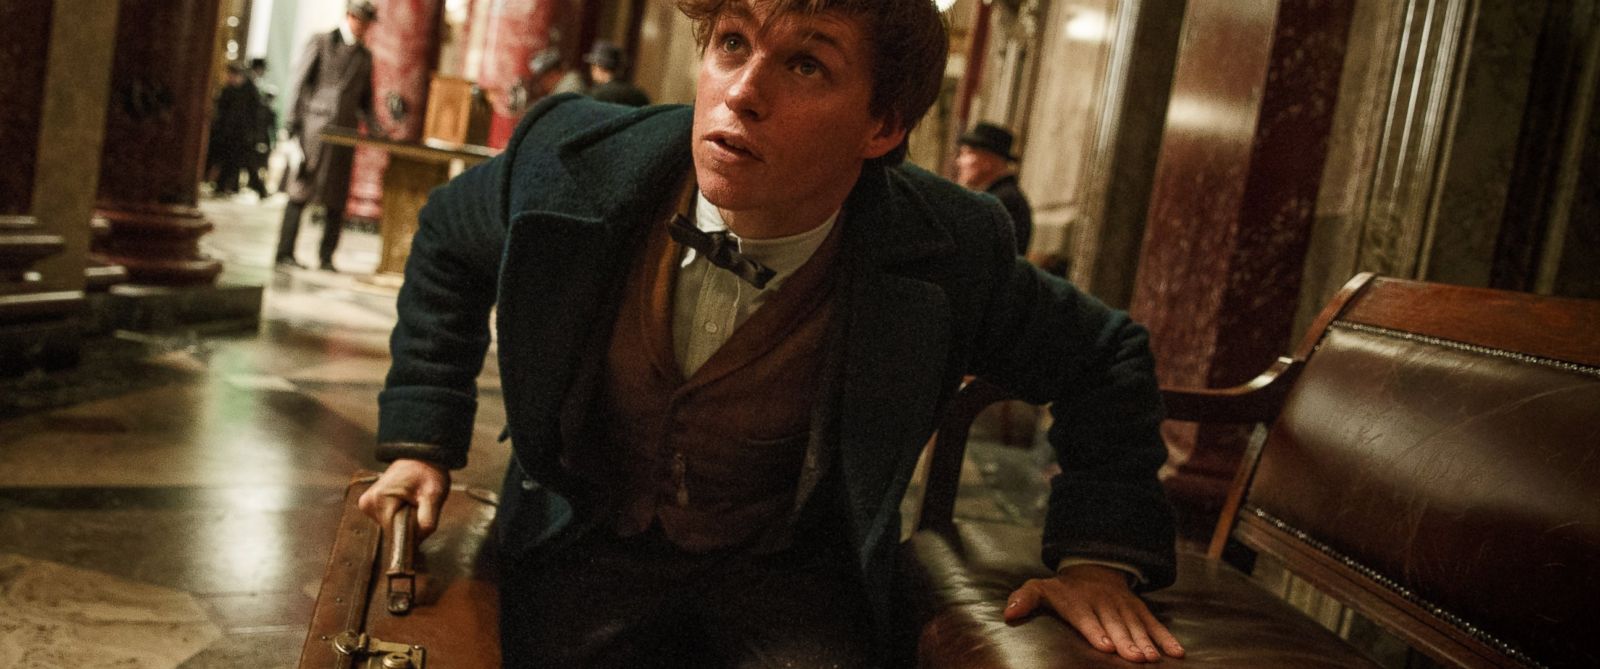 Fantastic Beasts And Where To Find Them Movie 2016 Watch Online